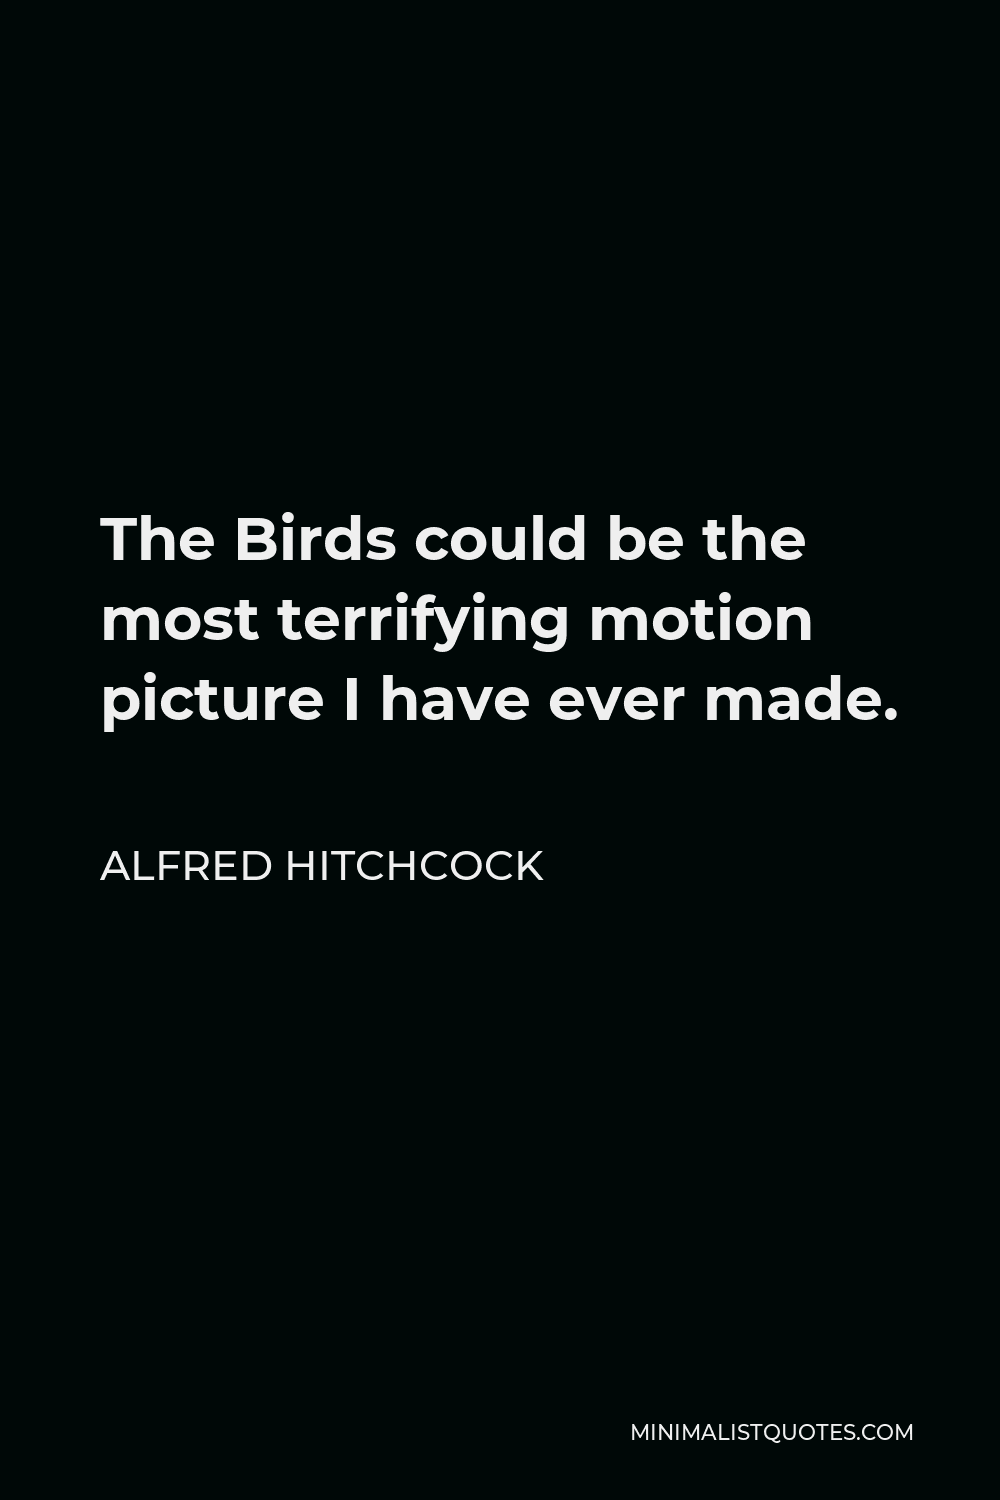 Alfred Hitchcock Quote - The Birds could be the most terrifying motion picture I have ever made.